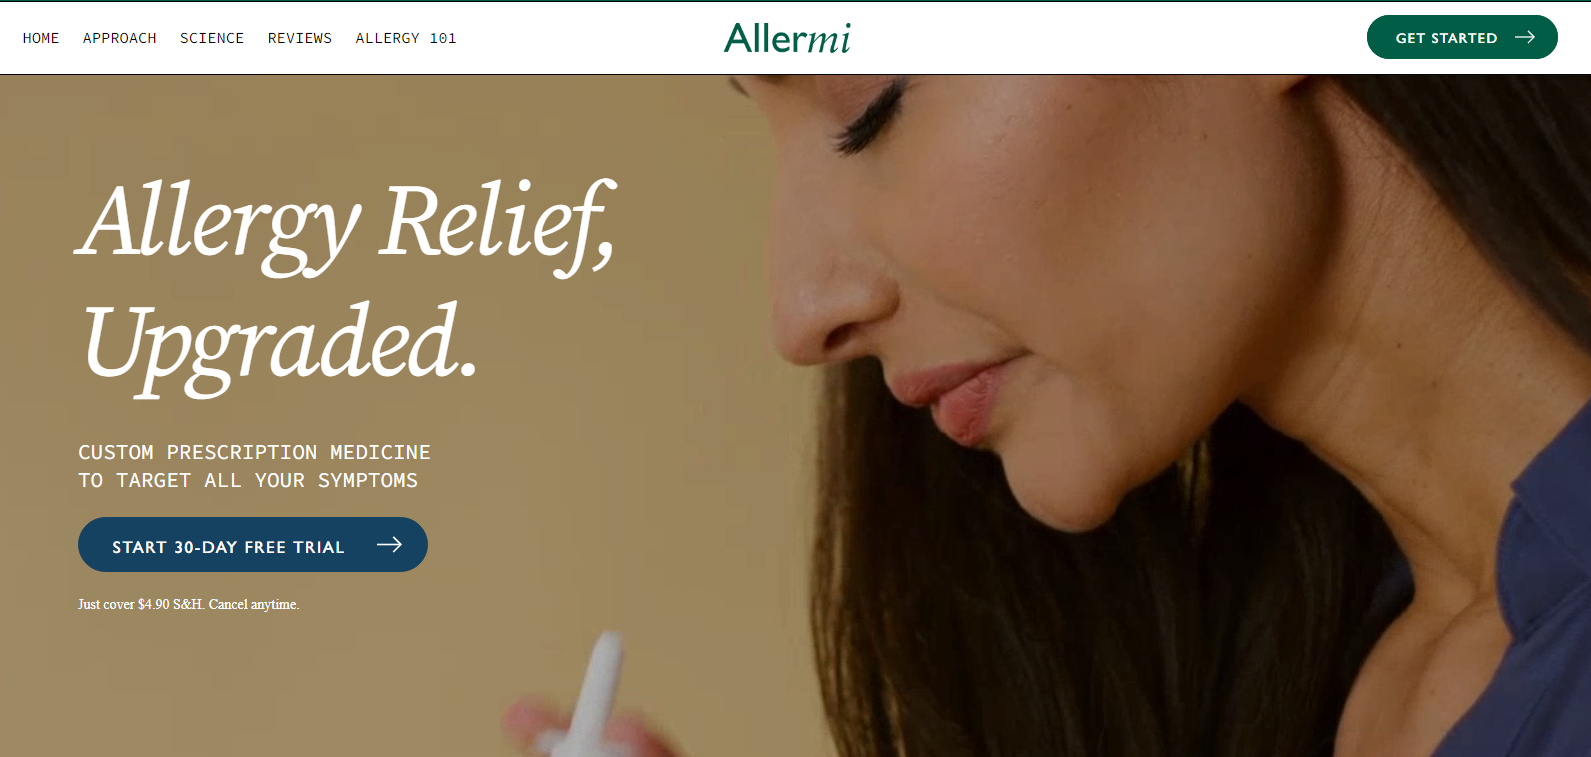 Allermi Secures $3.5 Million in Seed Funding Round Led by FourSight Capital Partners.